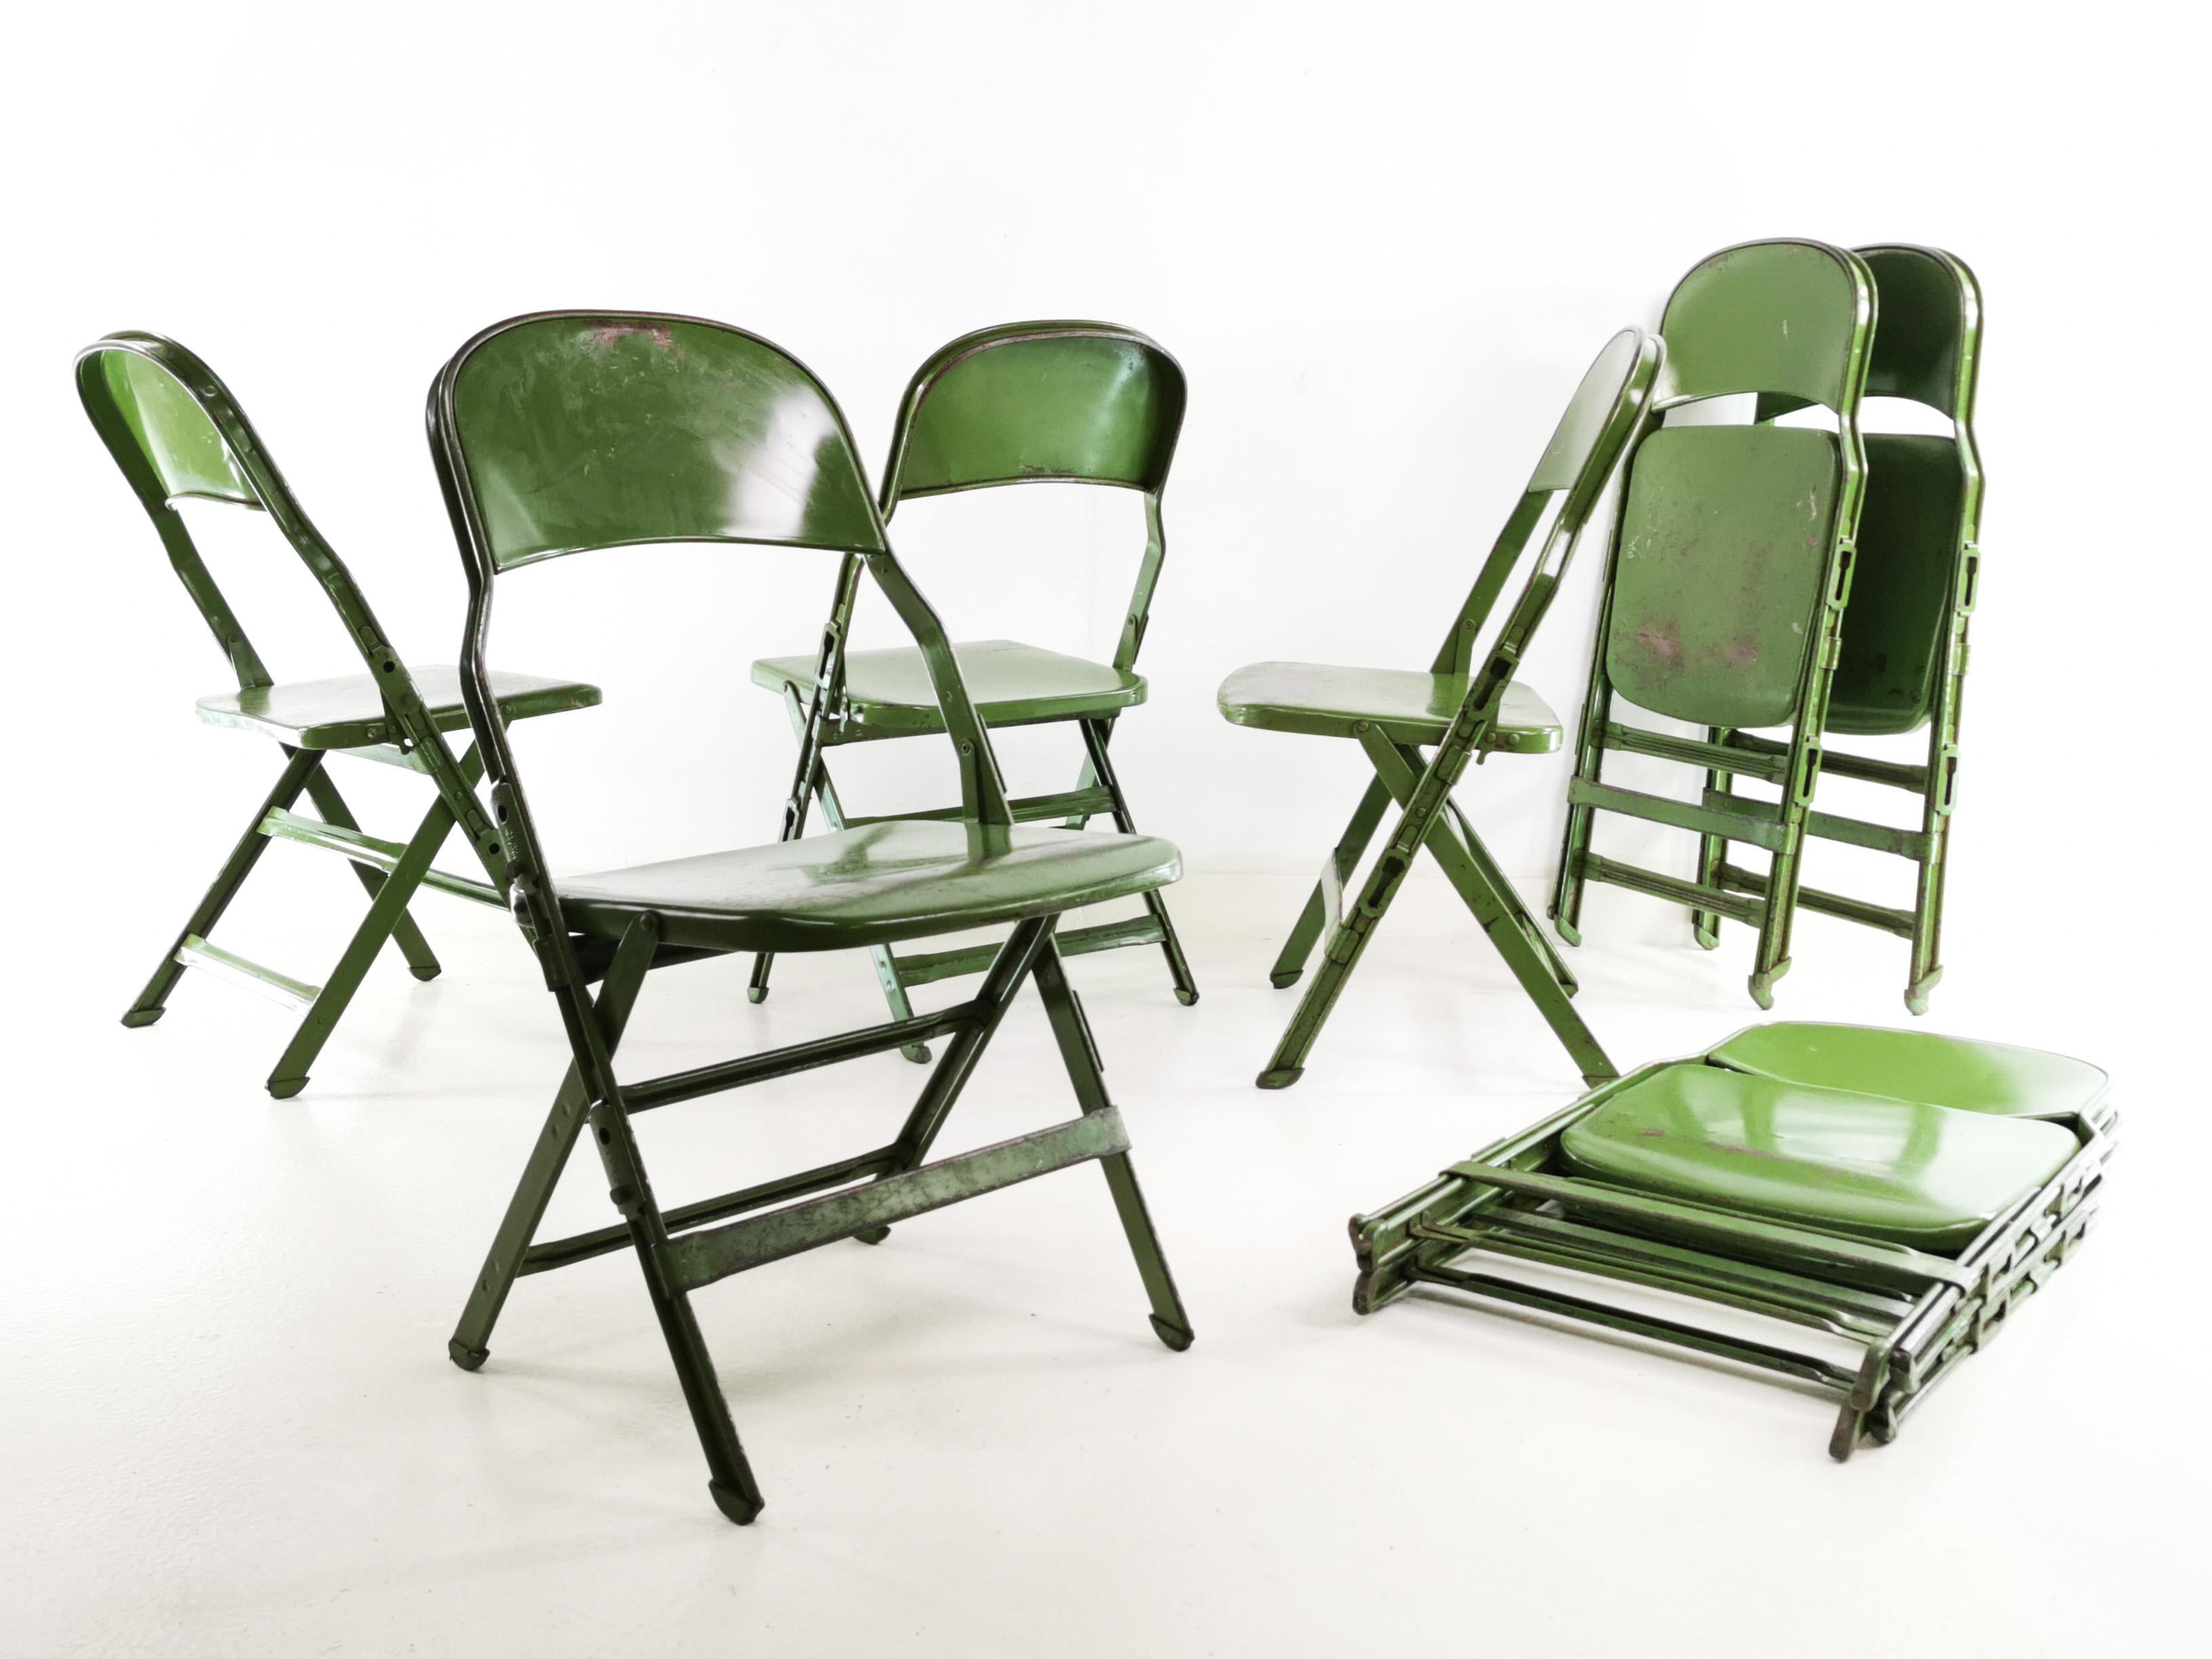 Mid-Century Modern Set of 4 Vintage Clarin Corp Military Army Folding Chairs, Midcentury